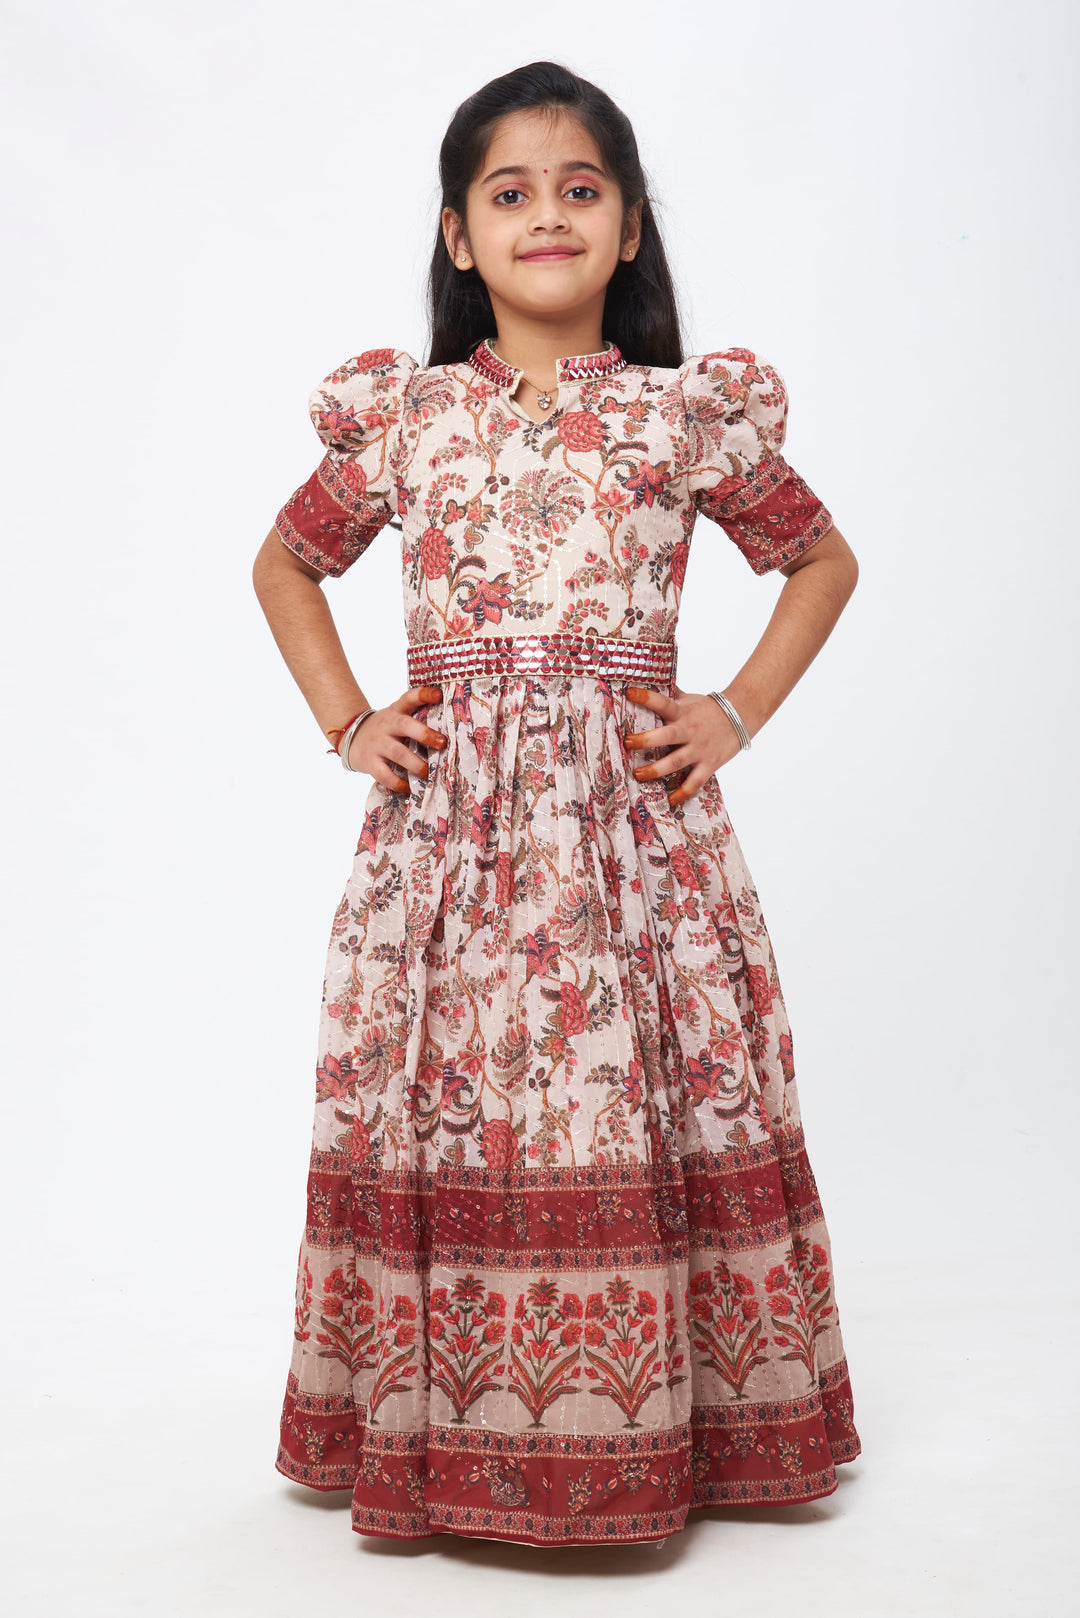 The Nesavu Girls Party Gown Mystic Blossom: Sequin Embroidered Floral Printed Maroon Childrens Gown Nesavu 18 (2Y) / Maroon / Georgette GA157A-18 A Dance of Fabric and Design | Luxurious Anarkali Gowns | The Nesavu